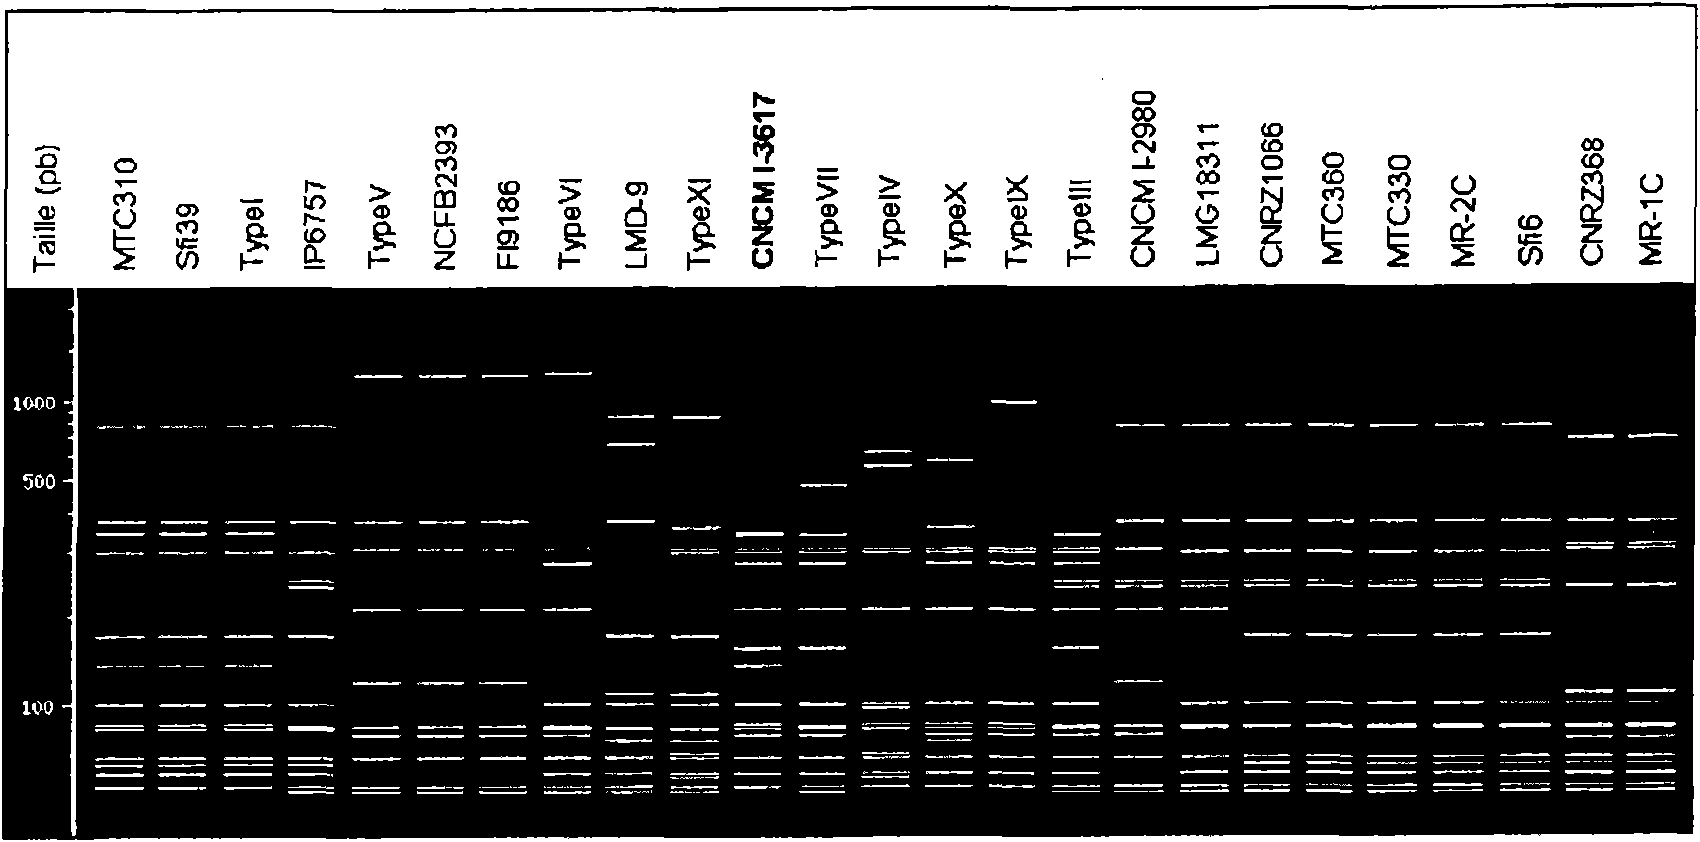 Genetic cluster of strains of streptococcus thermophilus having appropriate acidifying and texturizing properties for dairy fermentations